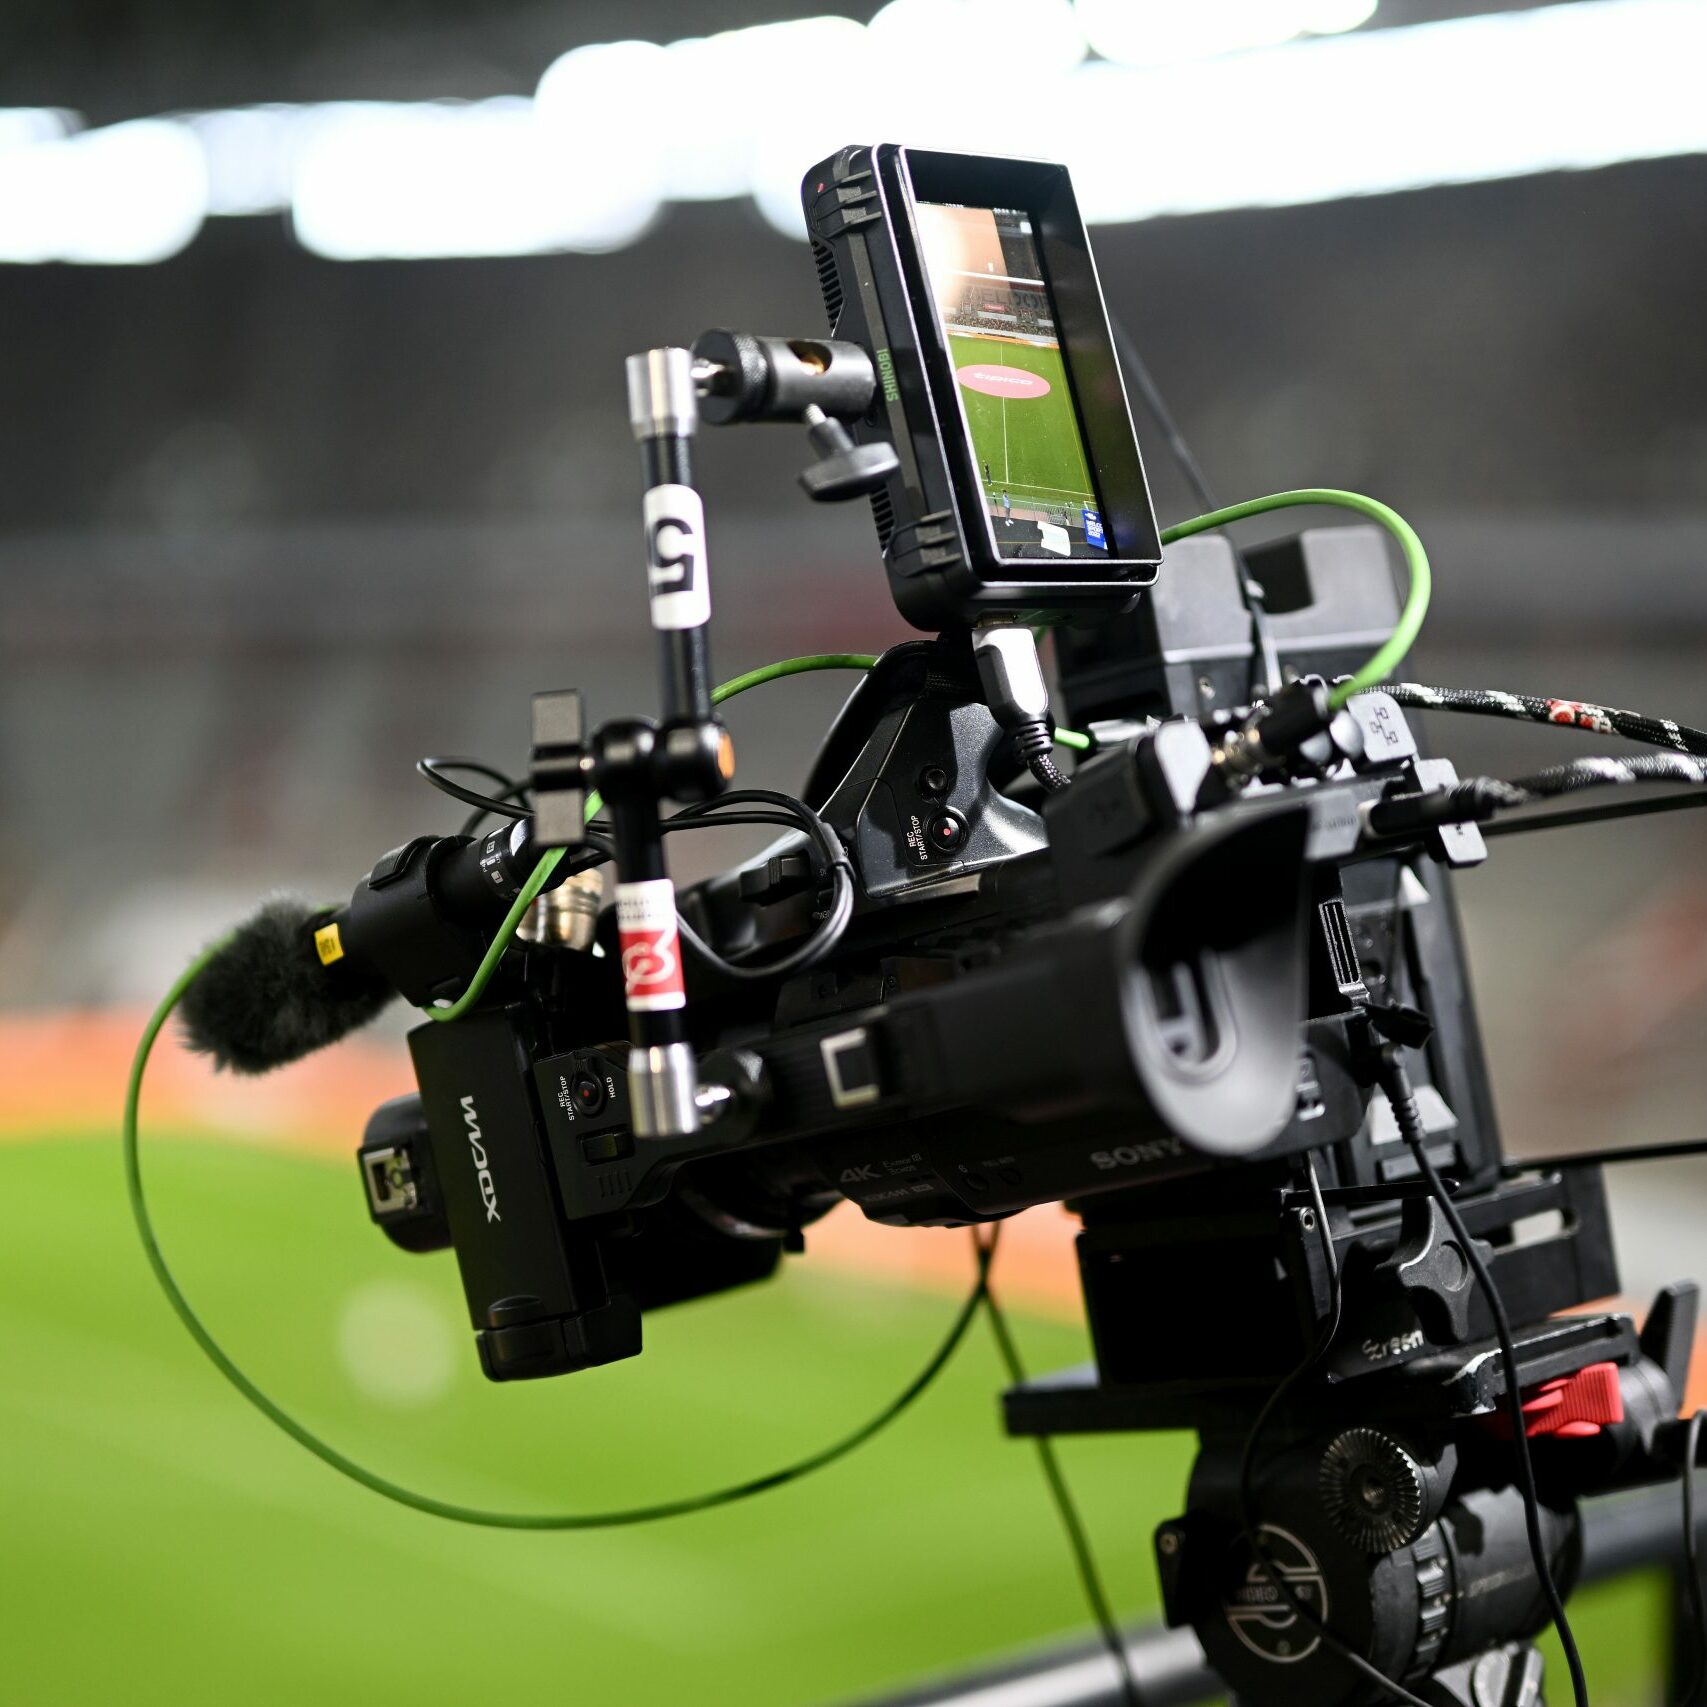 DUESSELDORF, GERMANY - MAY 11: Camera systems are seen during the Sportsinnovation 2022 at Merkur Spiel-Arena on May 11, 2022 in Duesseldorf, Germany. (Photo by Alexander Scheuber/Bundesliga/Bundesliga Collection via Getty Images)